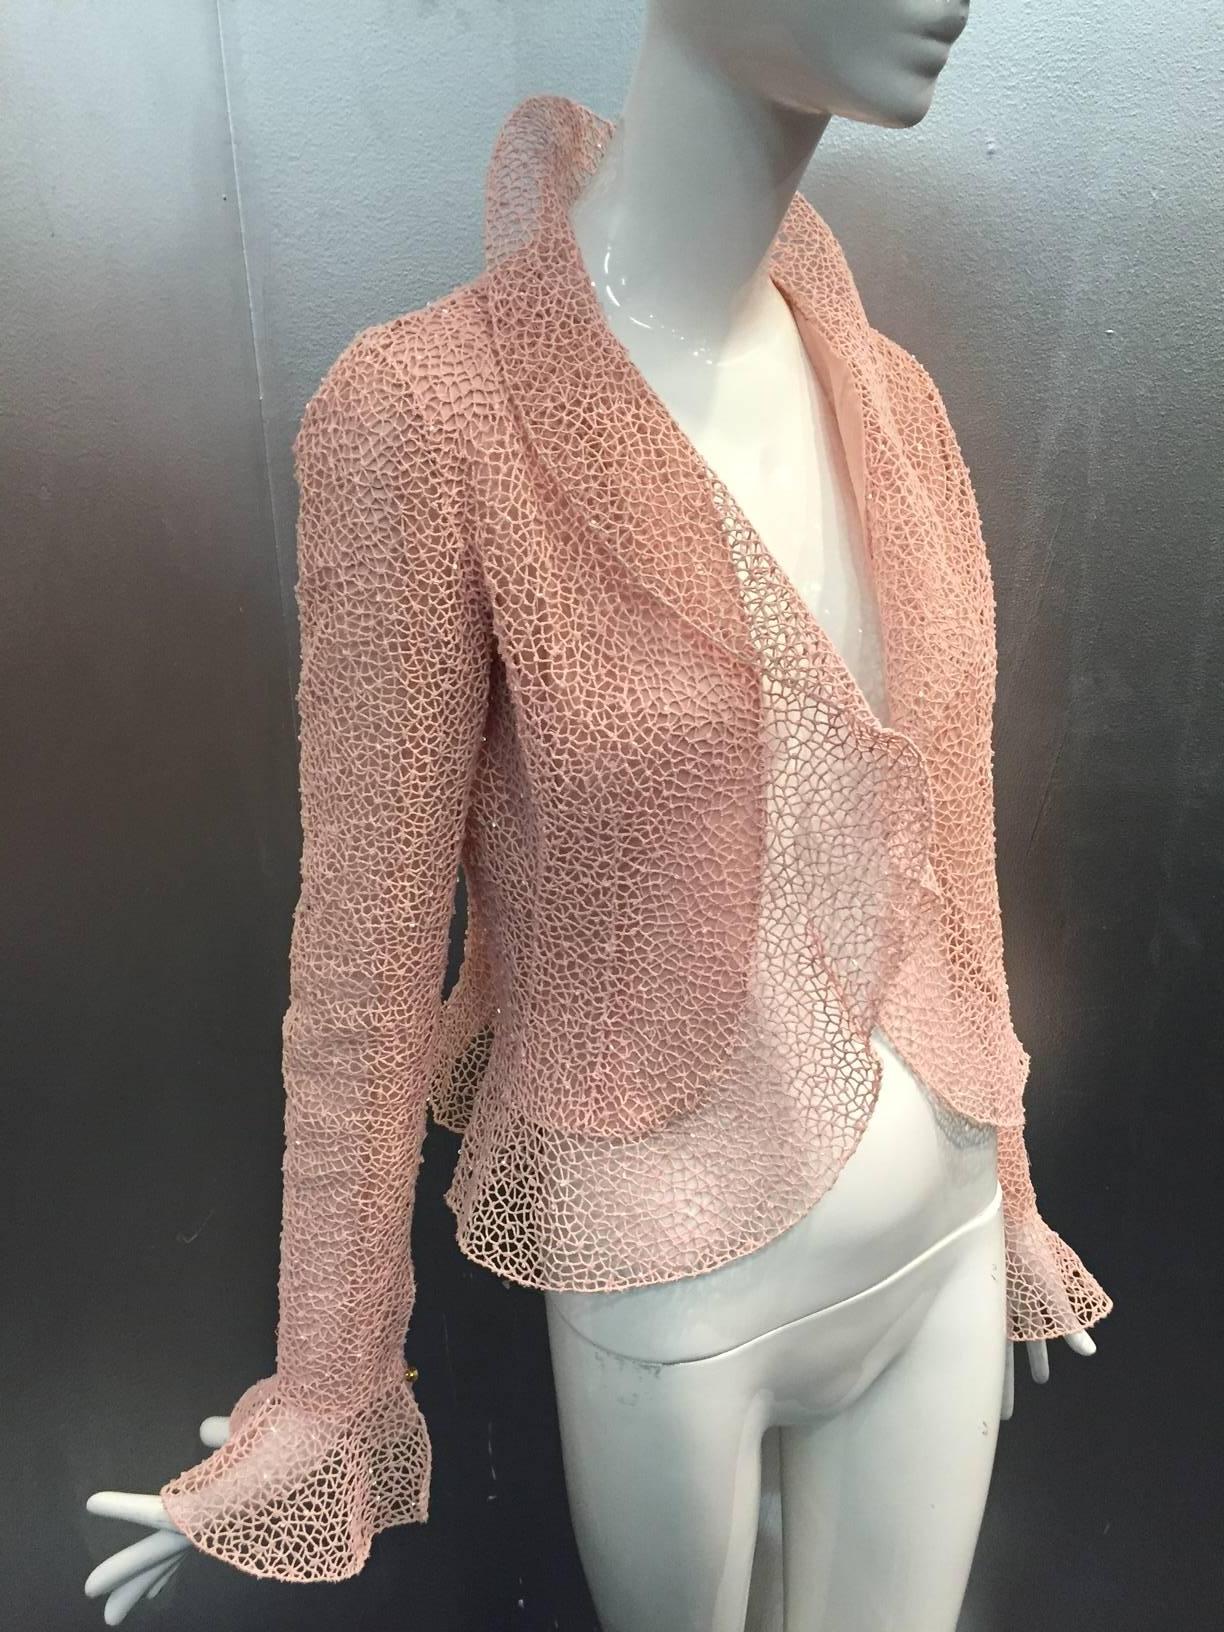 Oscar de La Renta pink mesh lace cropped jacket with ruffled hem, collar and cuffs. Rhinestone button at cuffs. Lined in silk chiffon and single snap closure. 